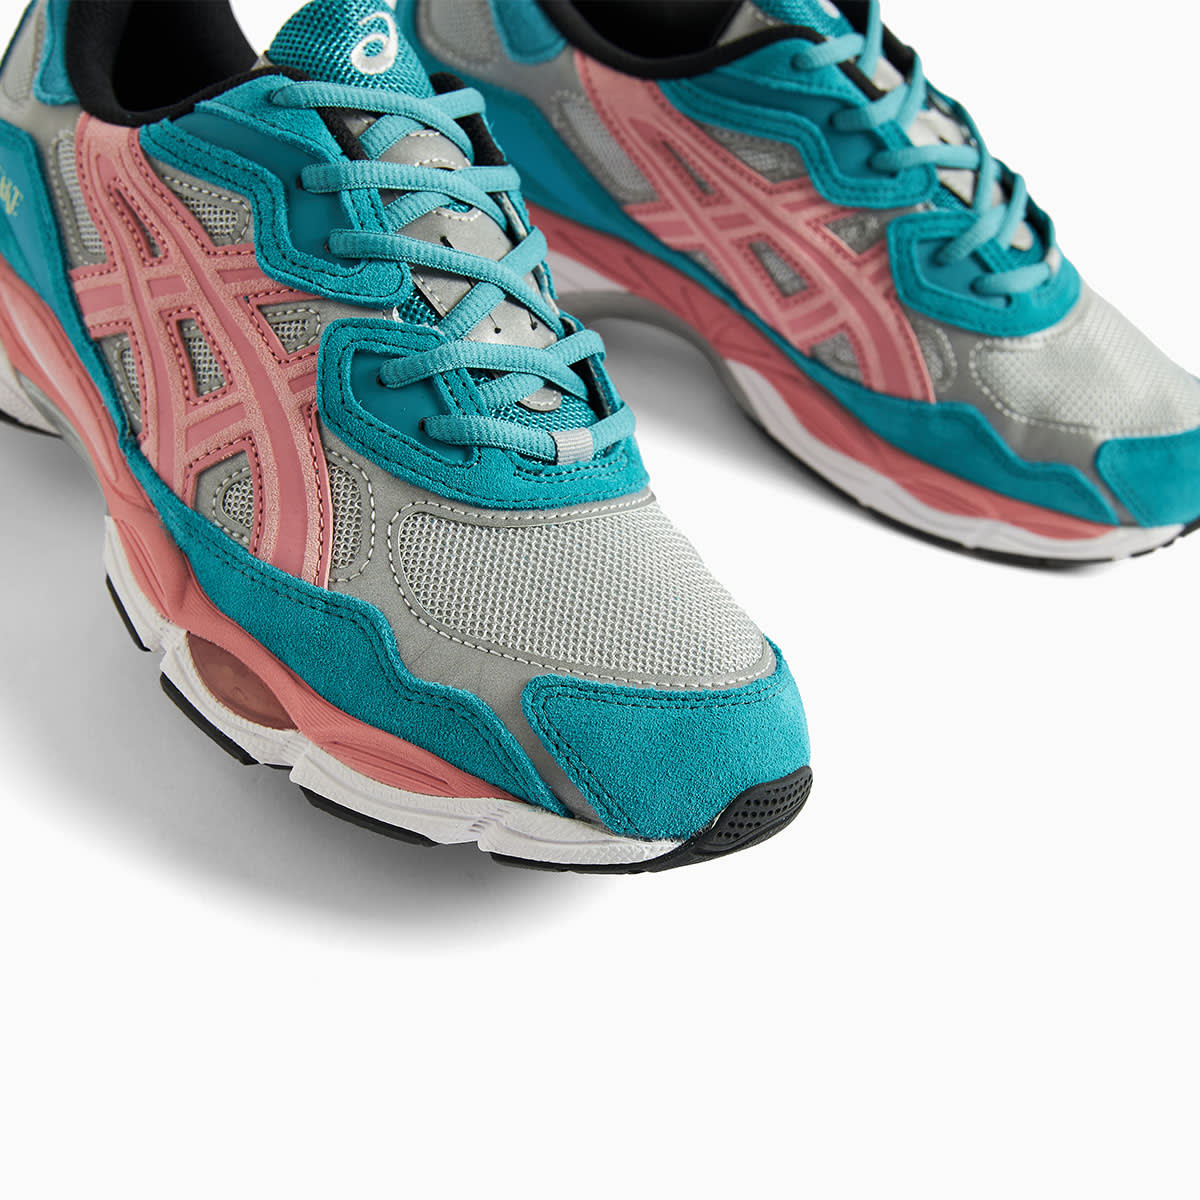 Asics x Awake Gel-NYC (Pure Sliver & Green-Blue Slate) | END. Launches